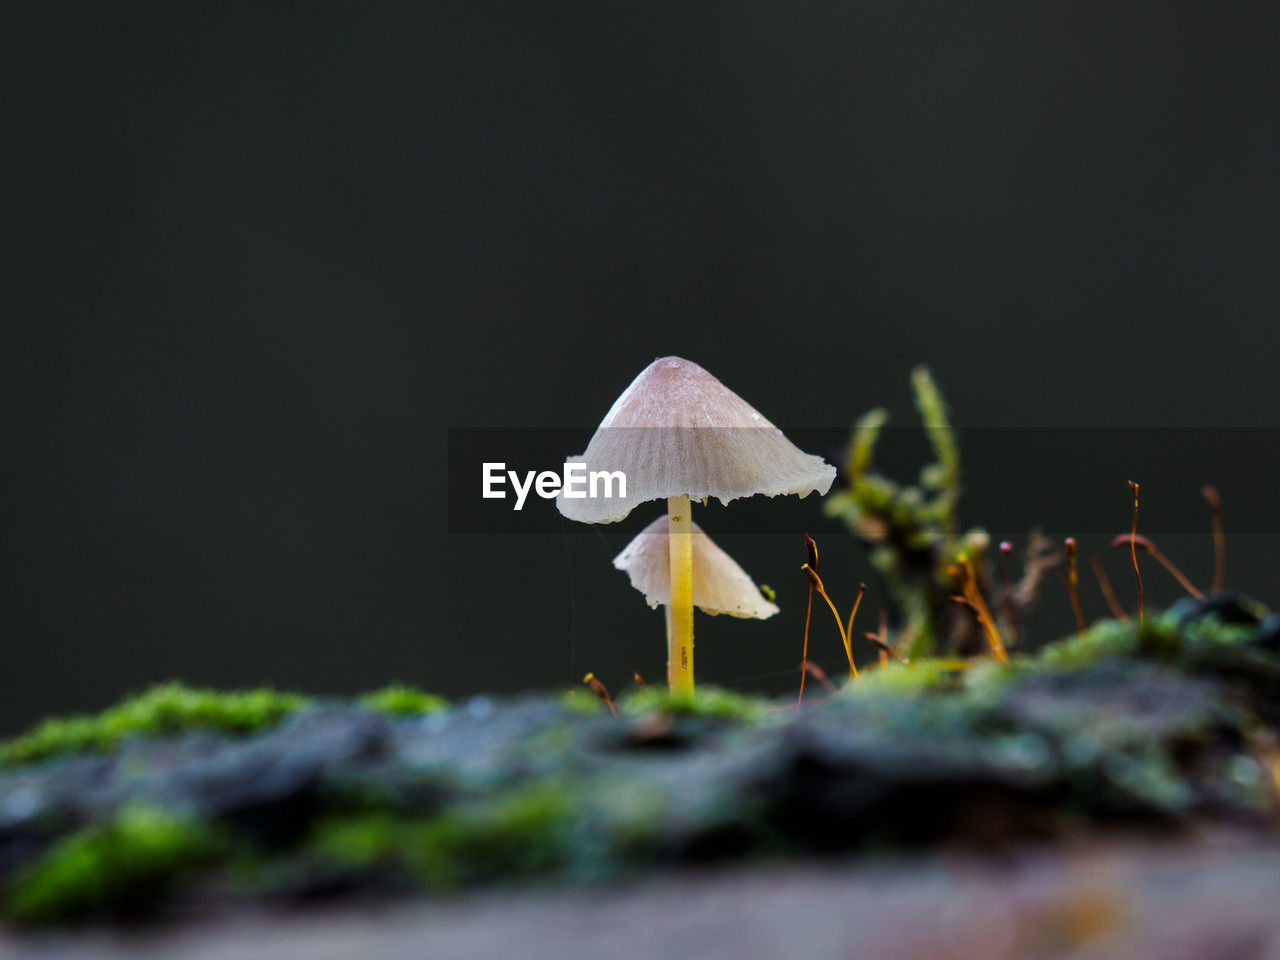 fungus, mushroom, nature, vegetable, macro photography, plant, green, food, growth, leaf, no people, close-up, forest, selective focus, land, moss, flower, beauty in nature, yellow, outdoors, tree, toadstool, fragility, freshness, copy space, food and drink, surface level, autumn, edible mushroom